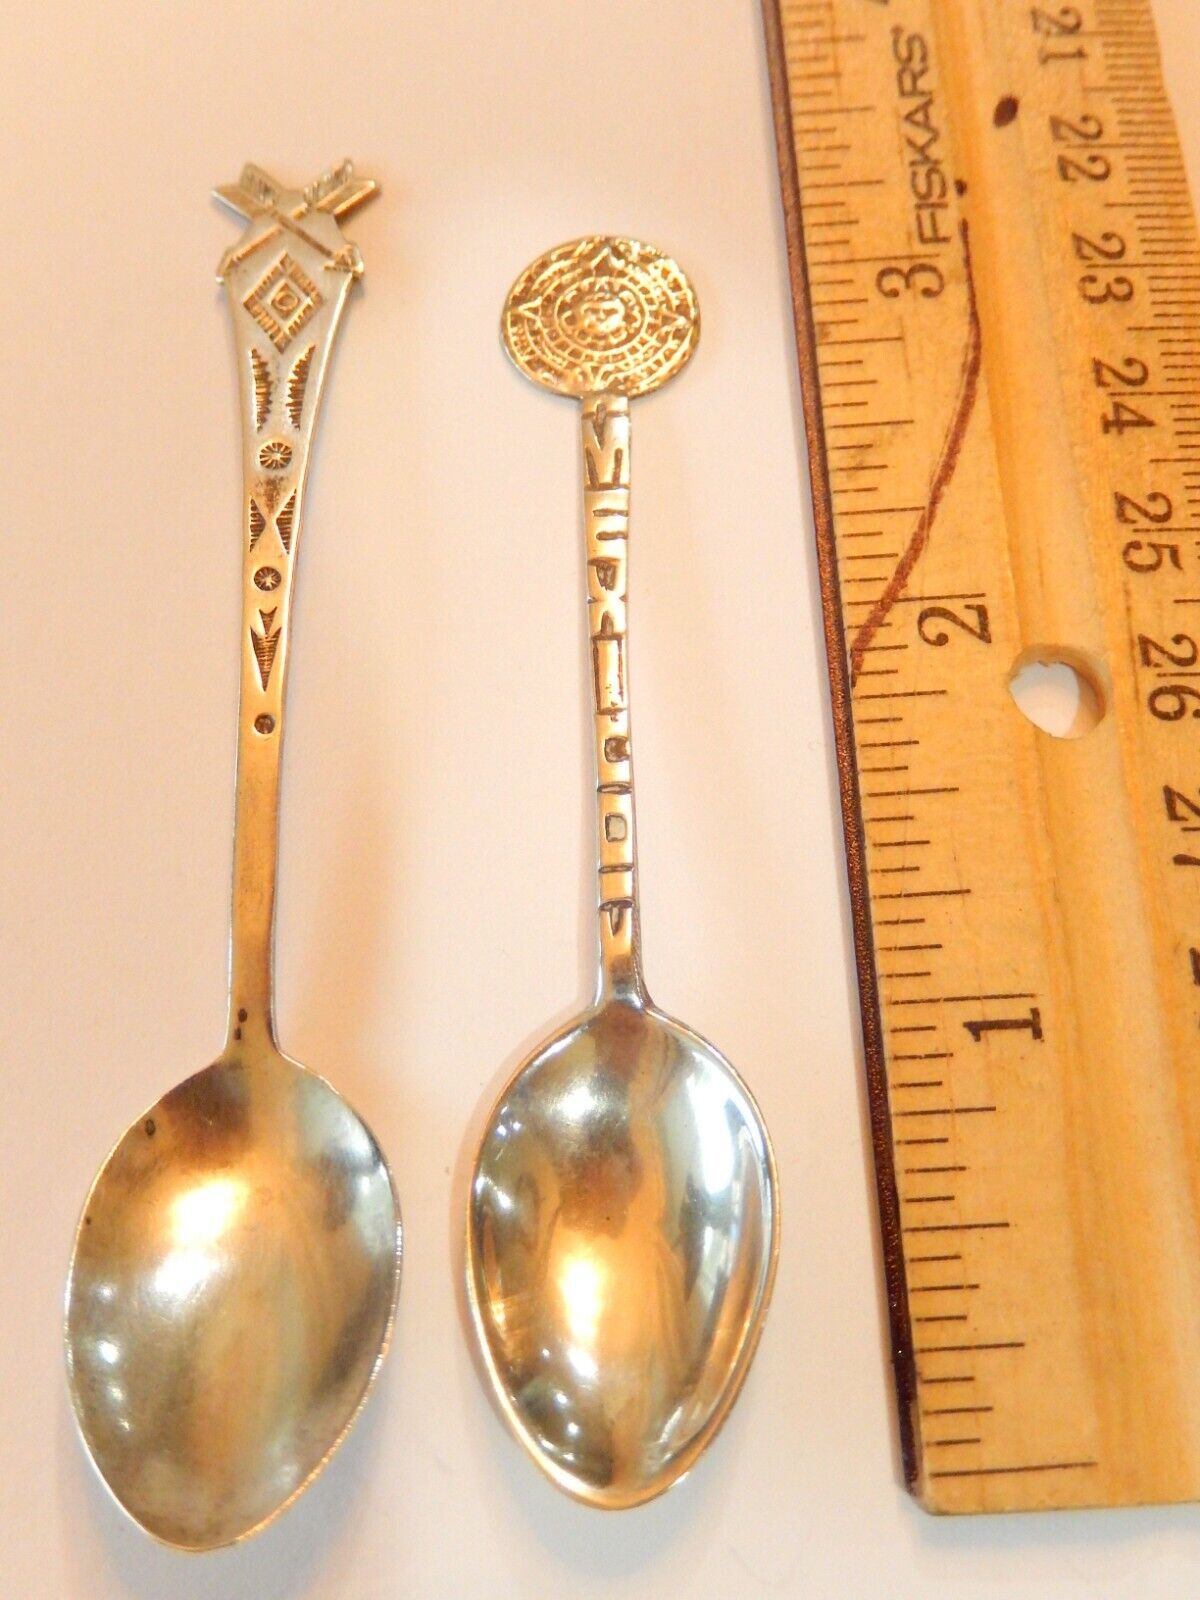 *ANTIQUE*  Two Native American & Mexico Sterling Silver Souvenir Spoons 3.75"